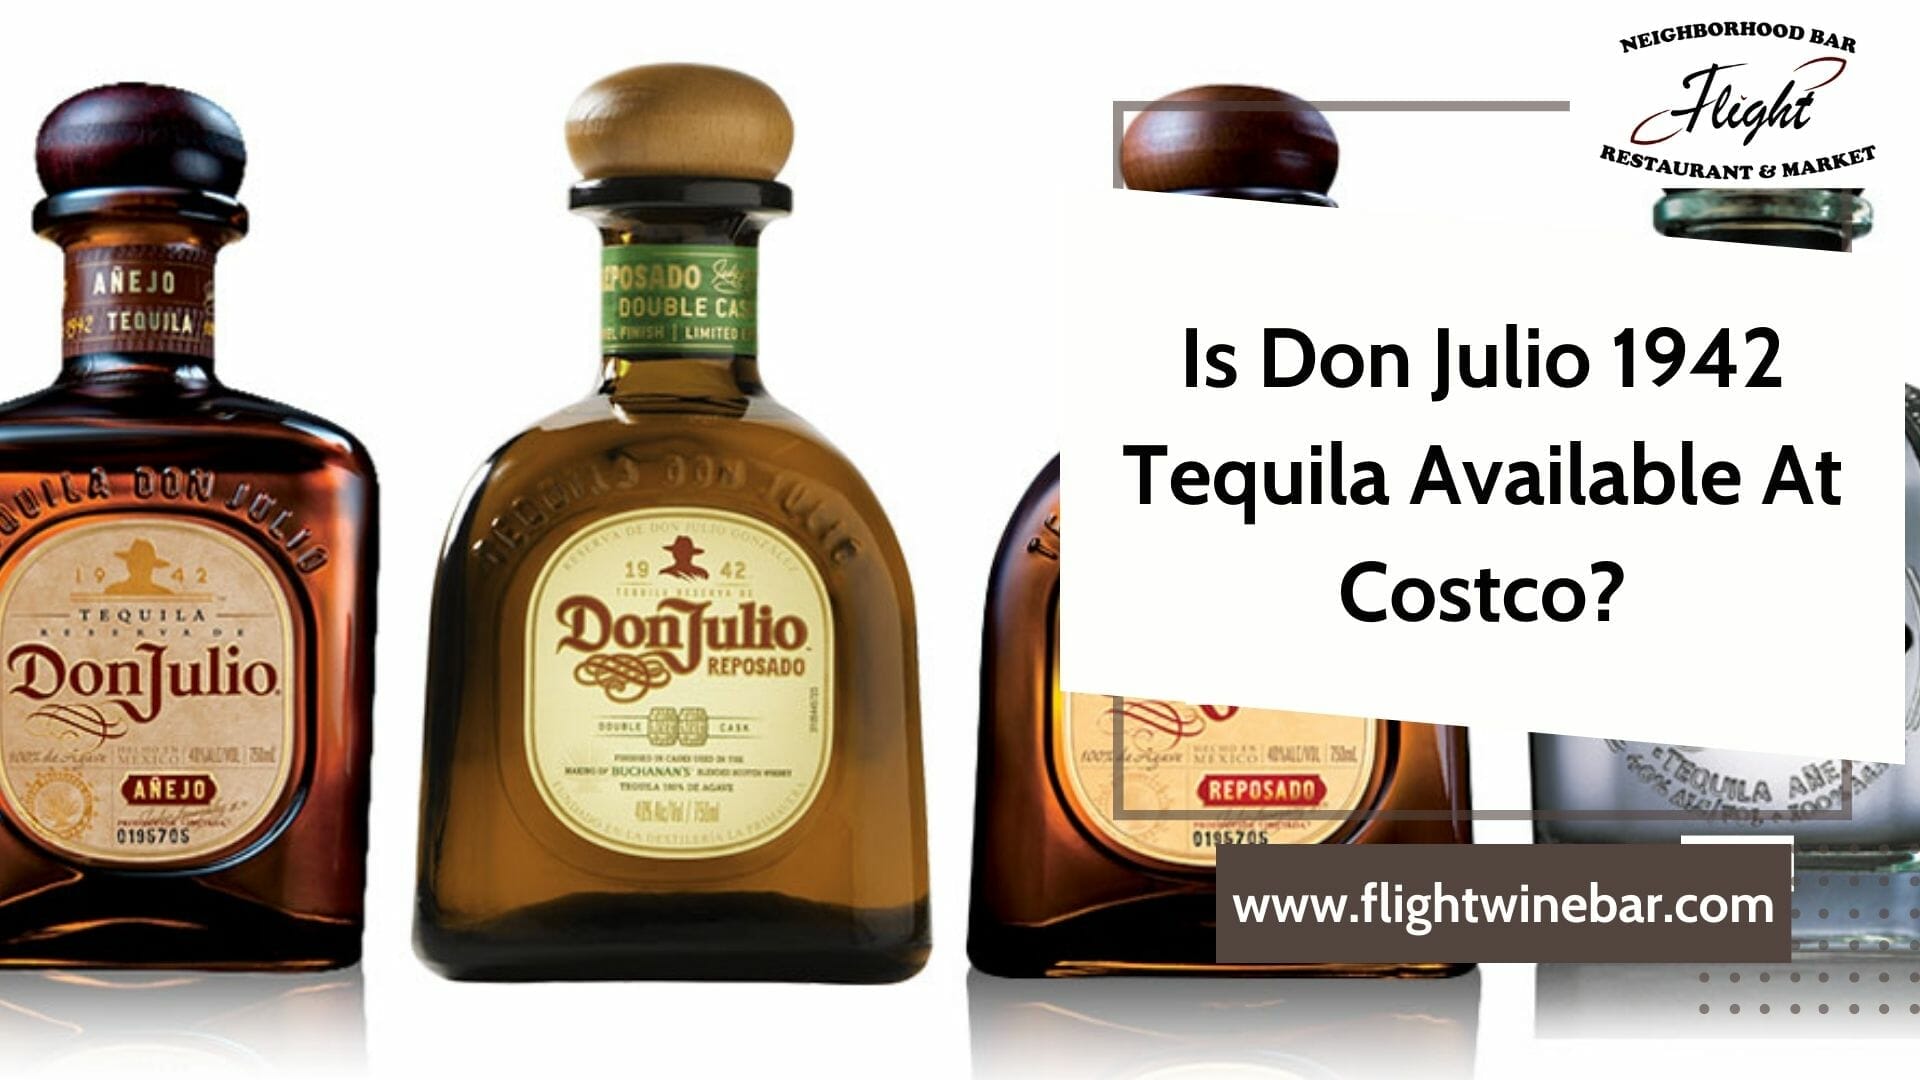 Is Don Julio 1942 Tequila Available At Costco